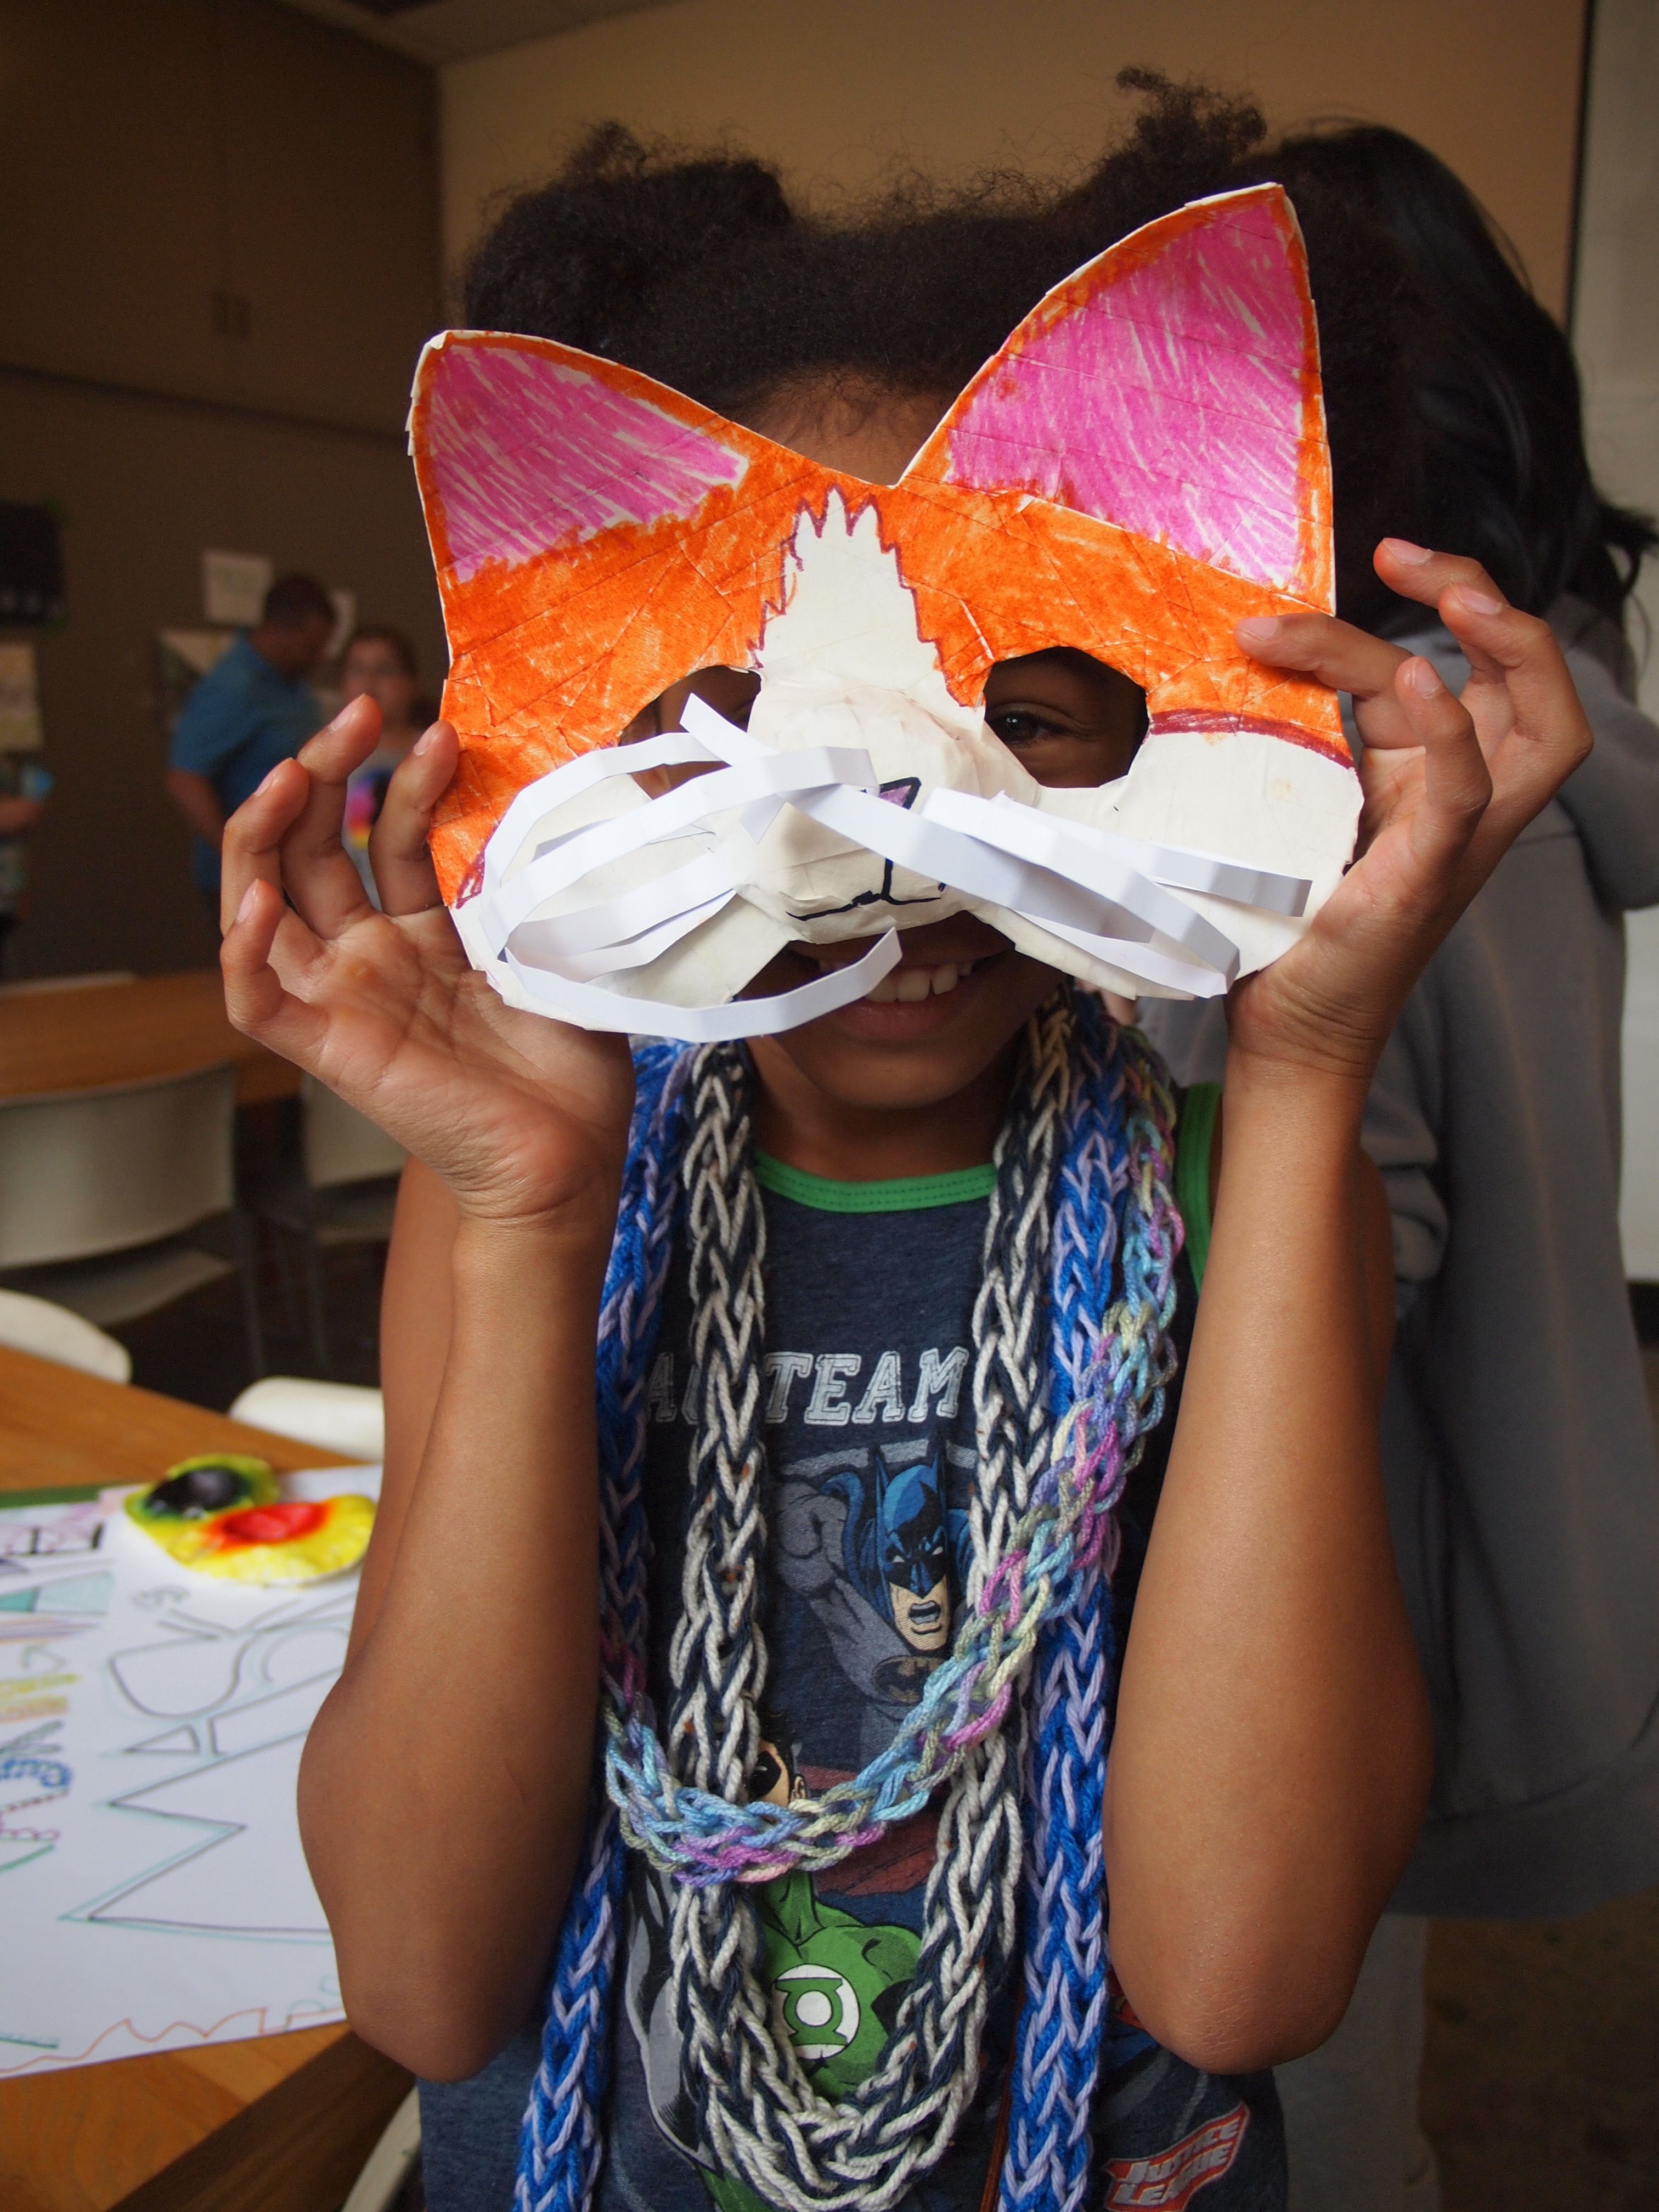 A young girl wearing multiple woven yarn necklaces holds an orange and white cat mask over her face